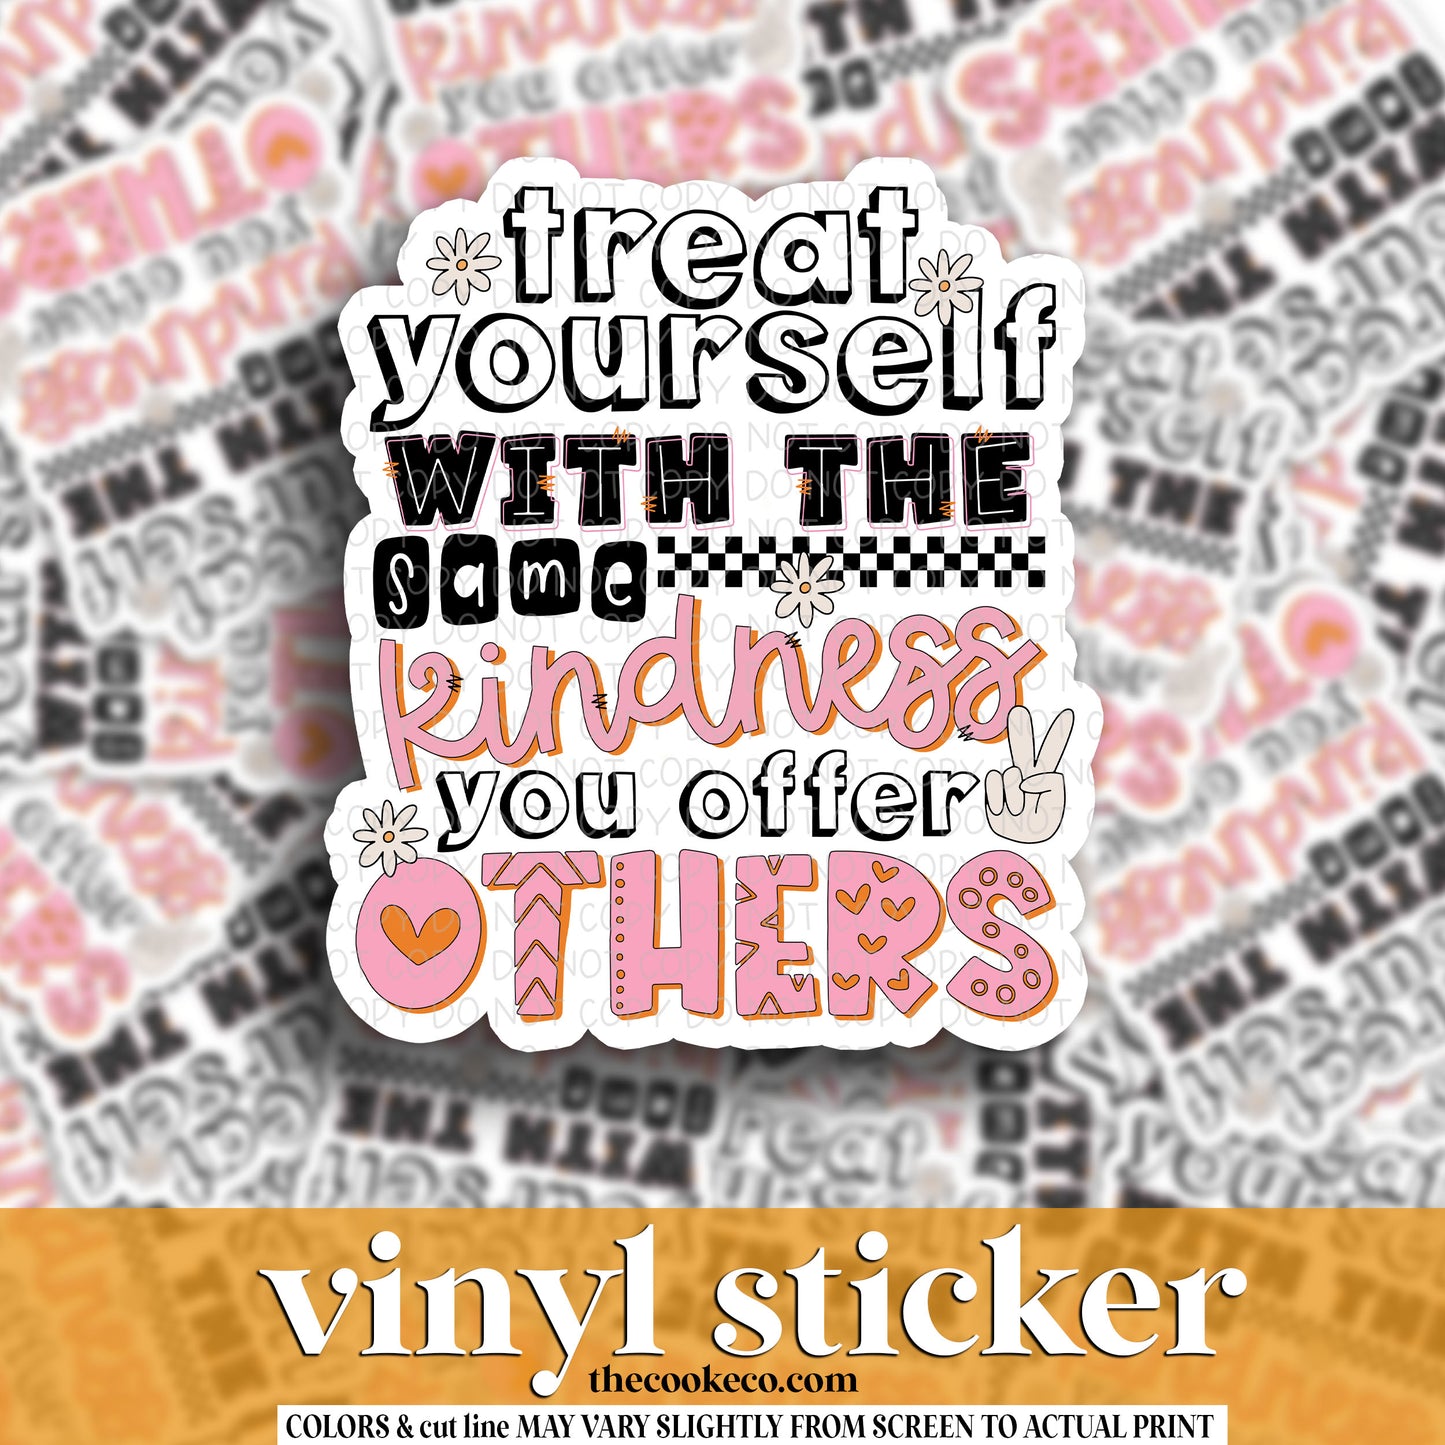 Vinyl Sticker | #V1283 - TREAT YOURSELF WITH THE SAME KINDNESS